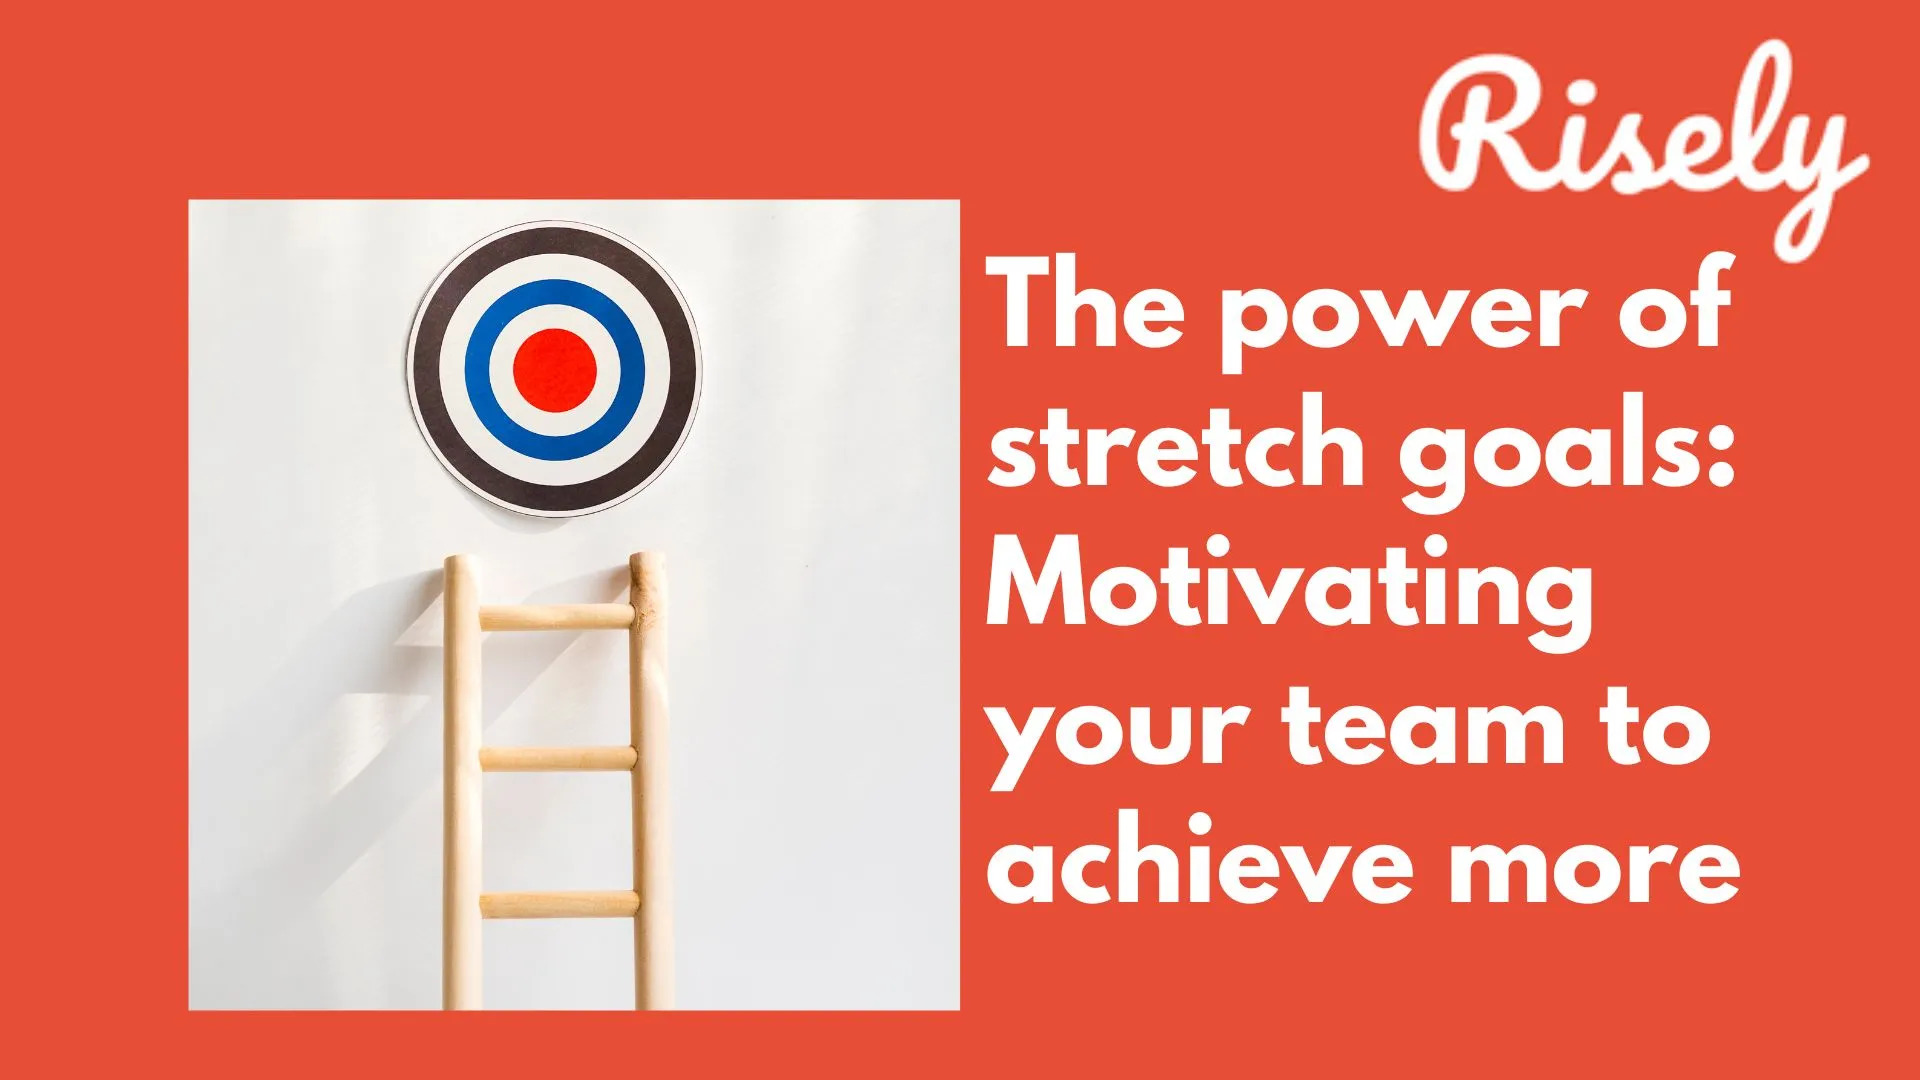 The power of stretch goals: Motivating your team to achieve more